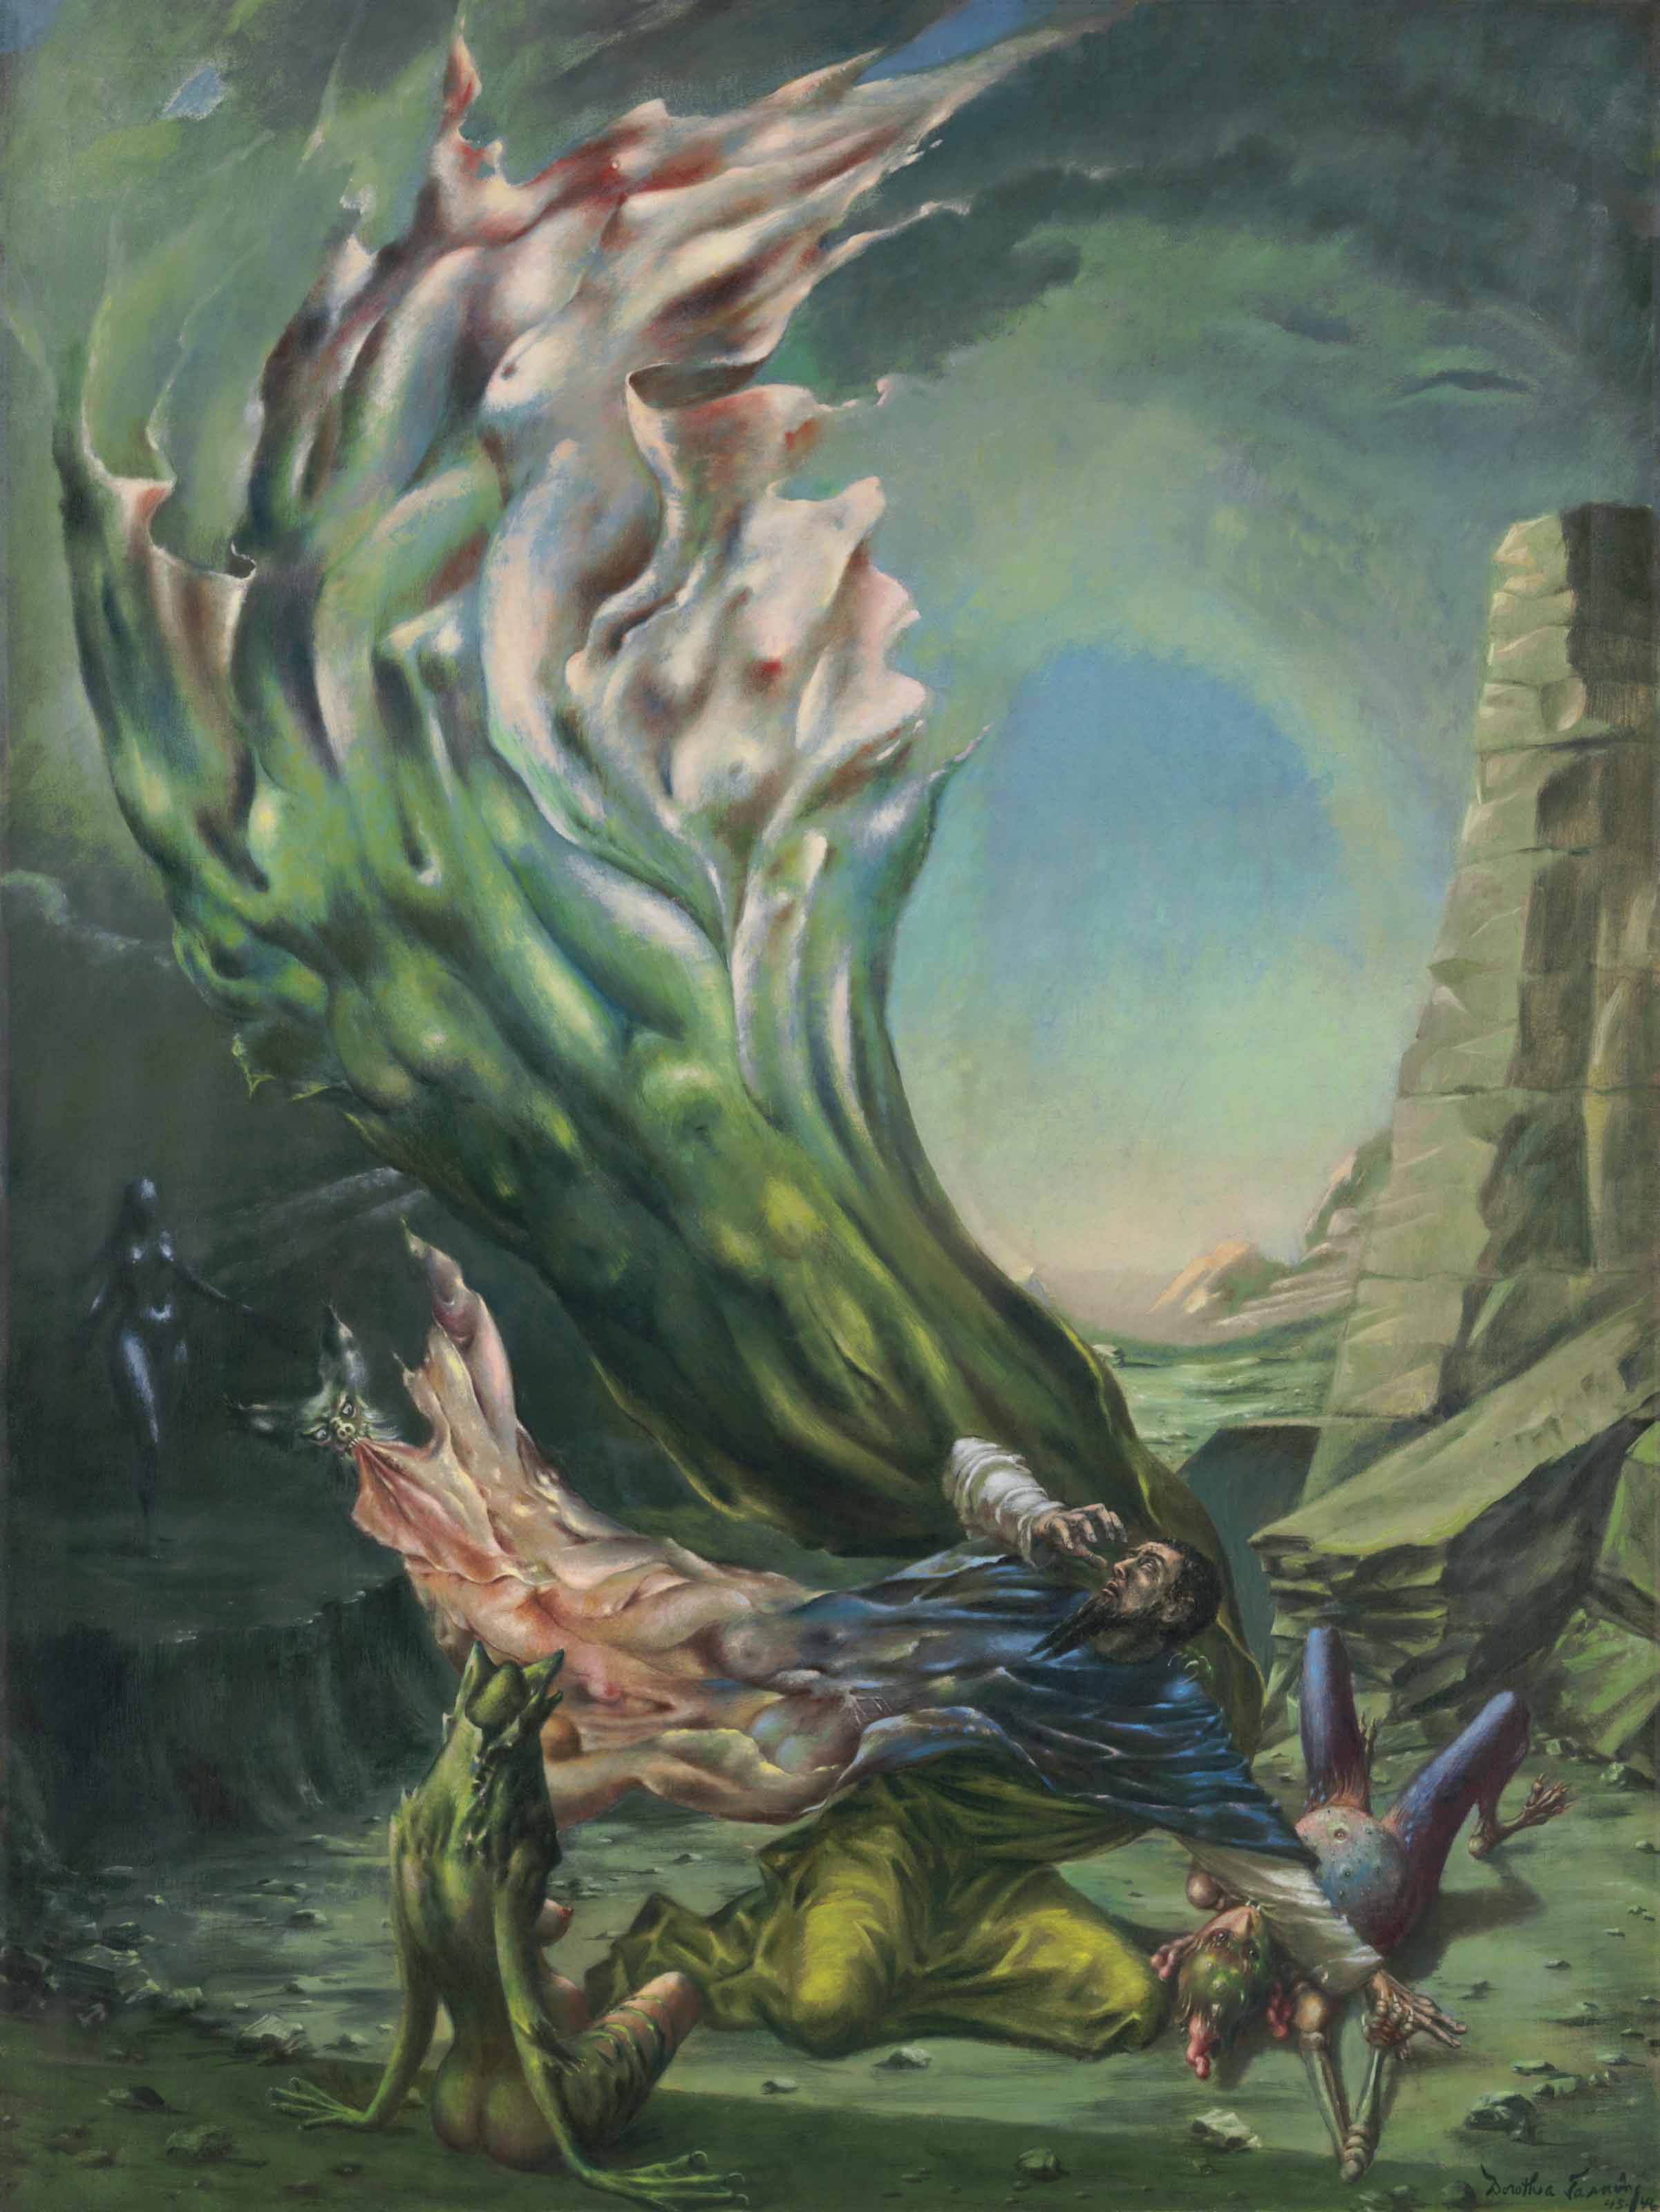 The Temptation of St. Anthony a painting by Dorothea Tanning